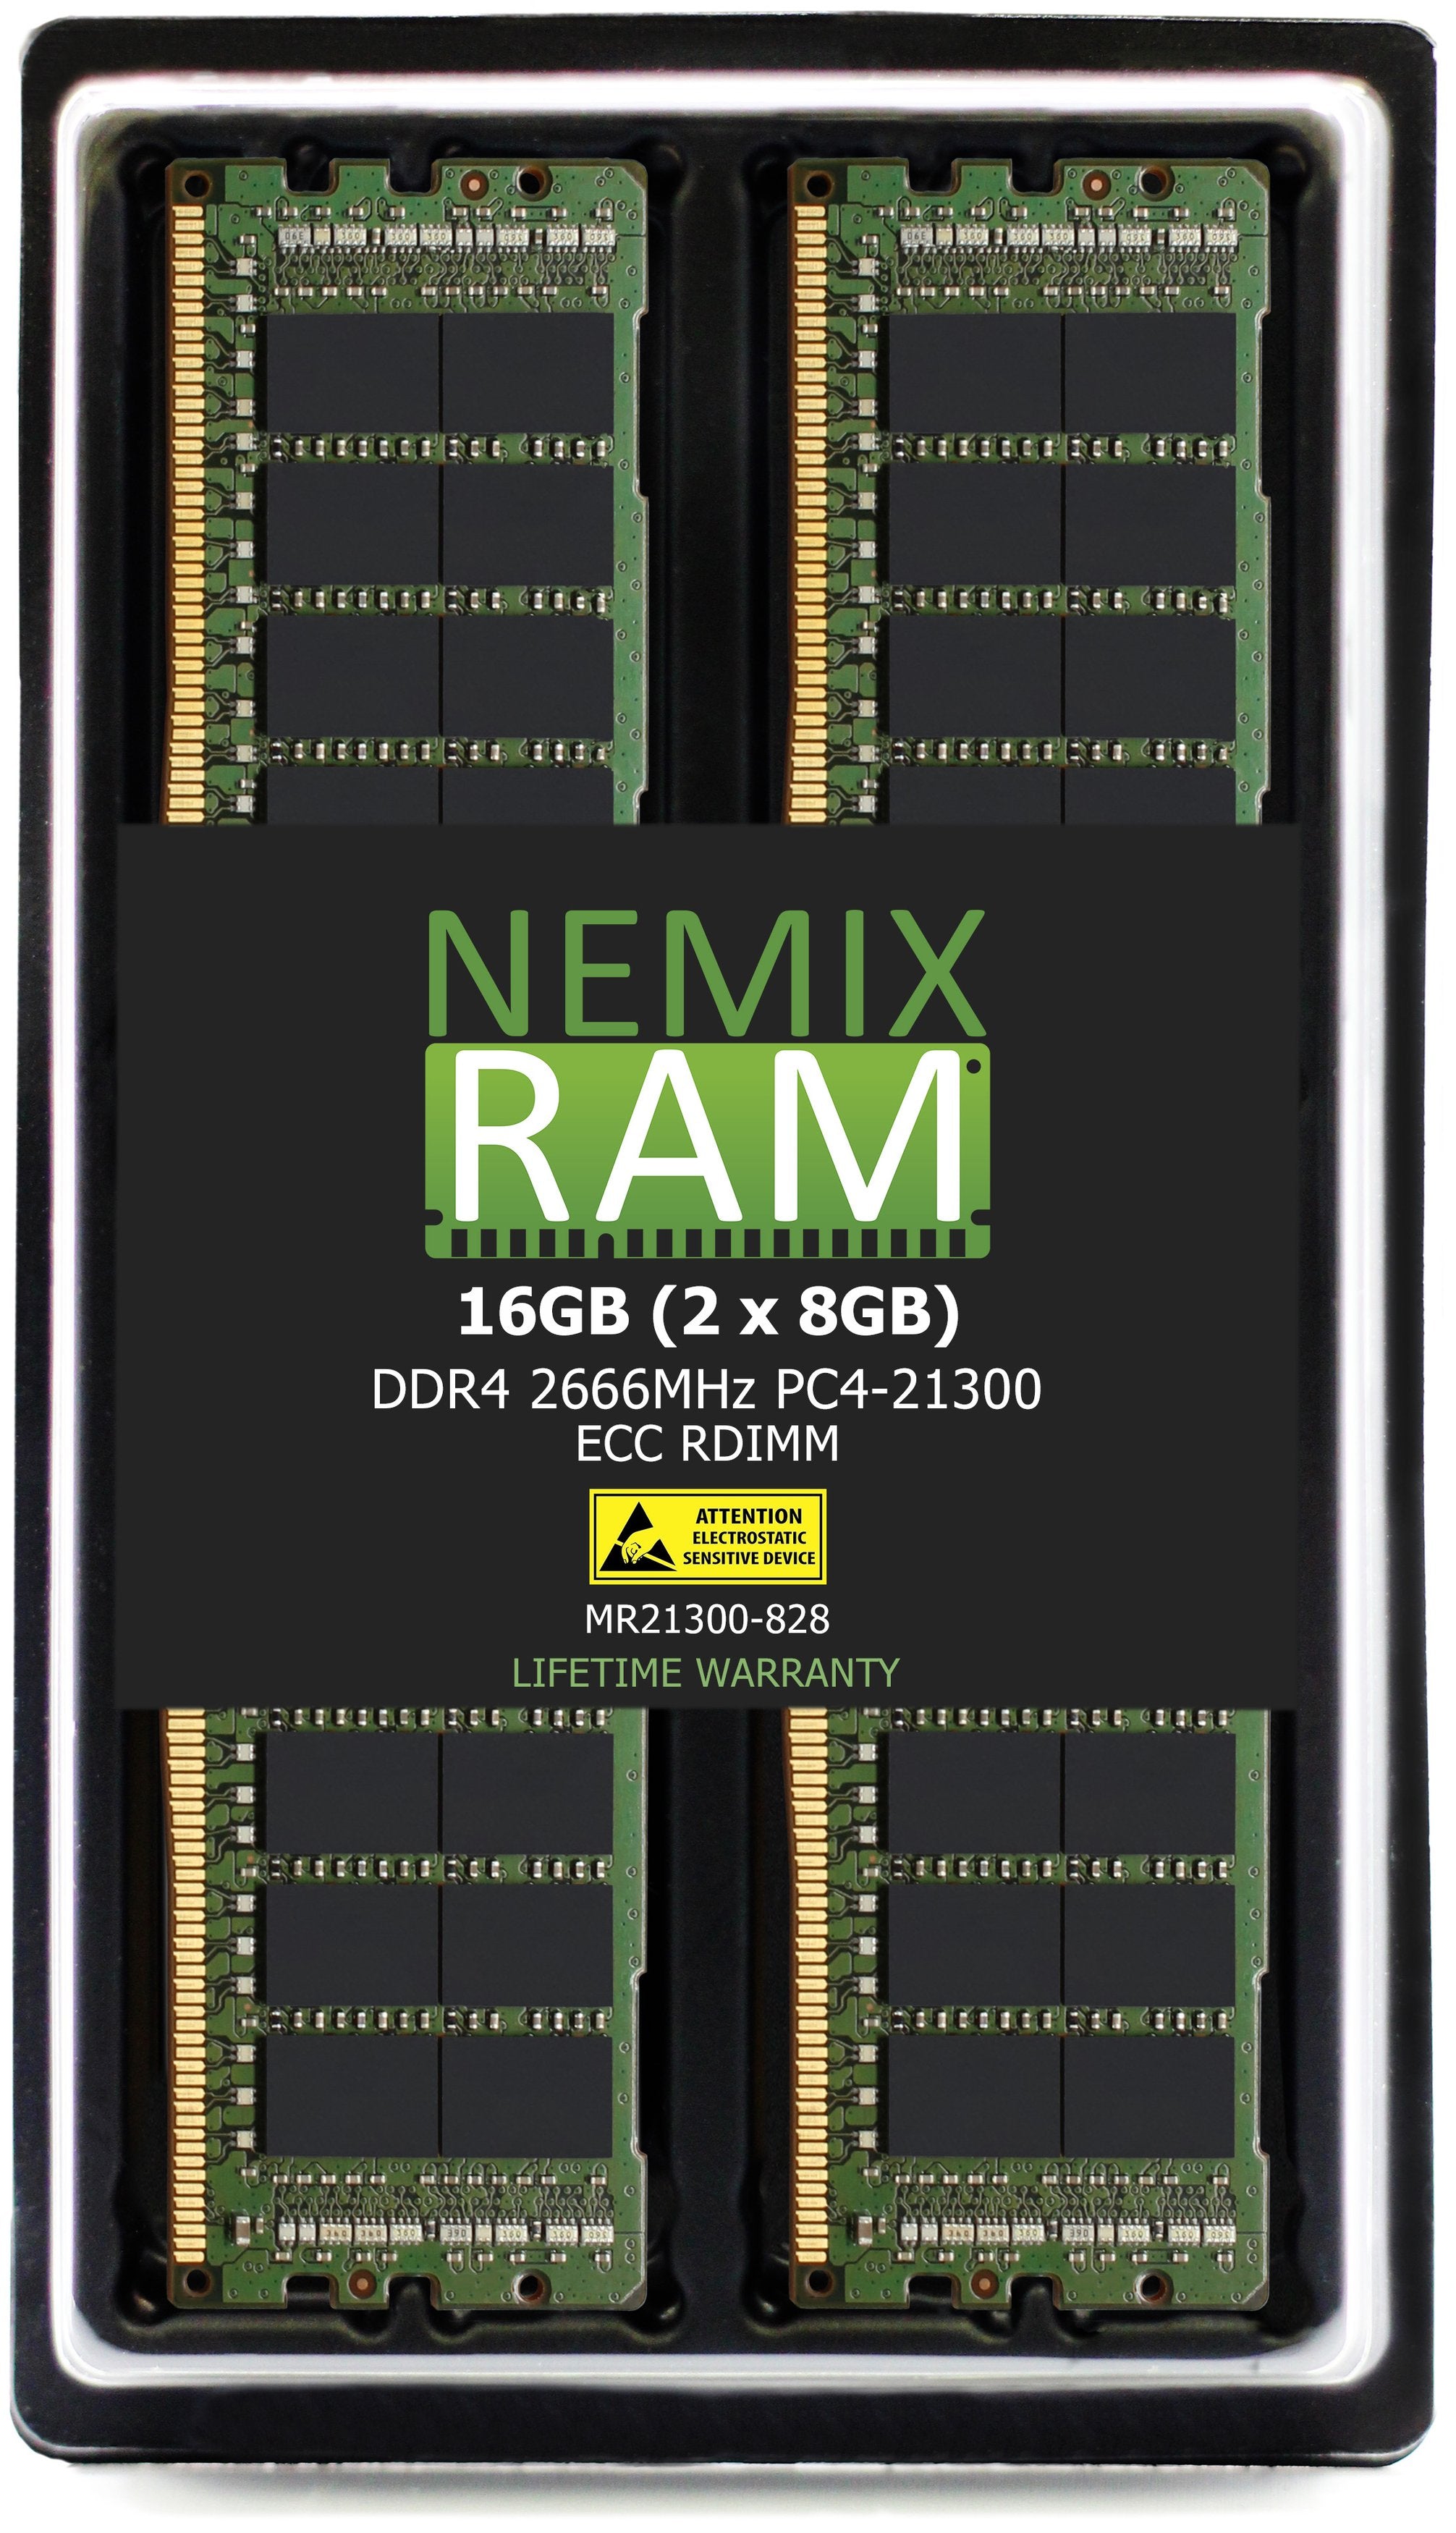 DDR4 2666MHZ PC4-21300 RDIMM for Apple Mac Pro 2019 7,1 8-core